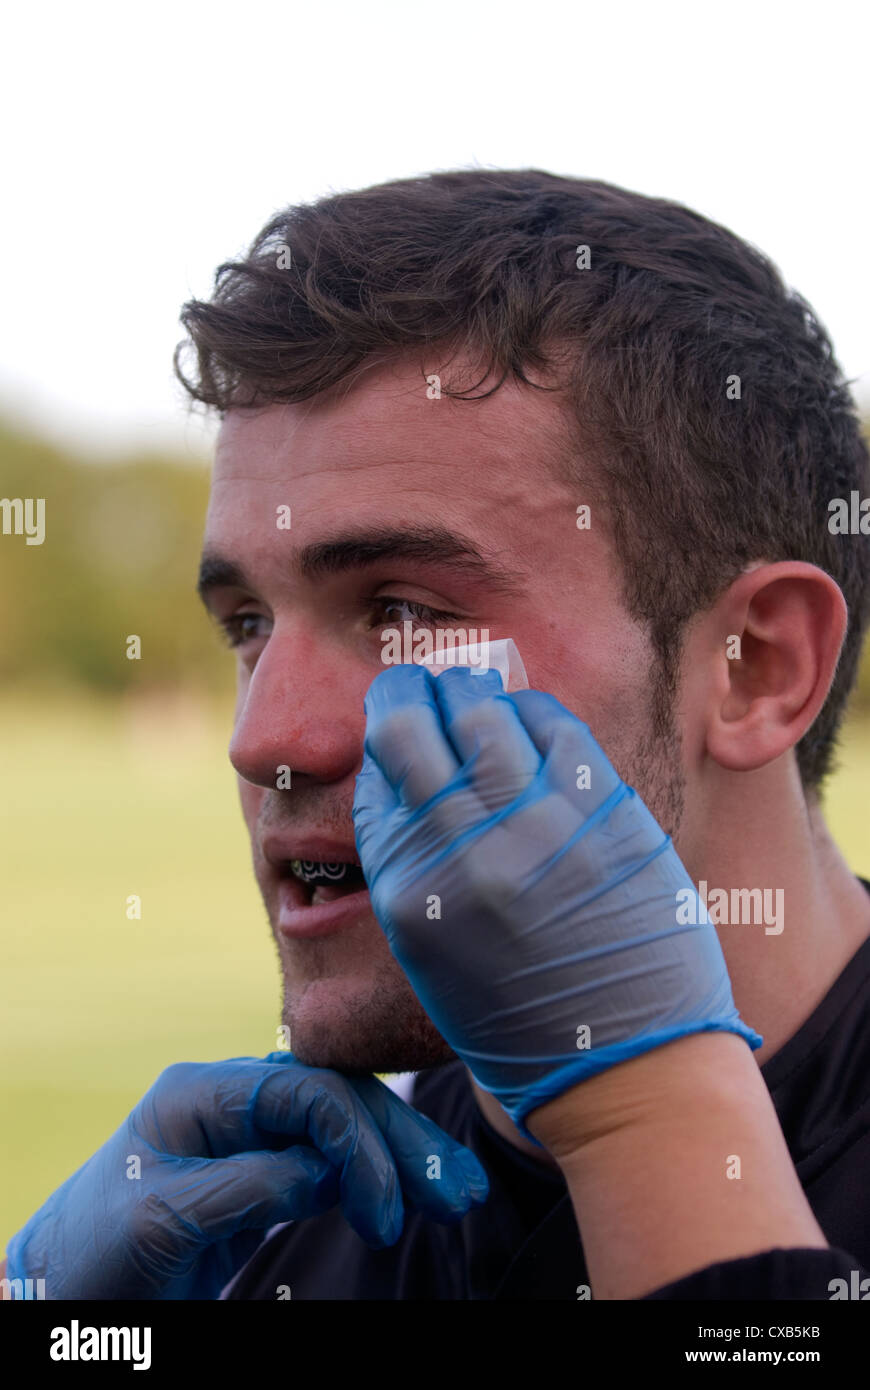 Rugby player receiving medical attention during game, Farnham, Surrey, UK. Stock Photo